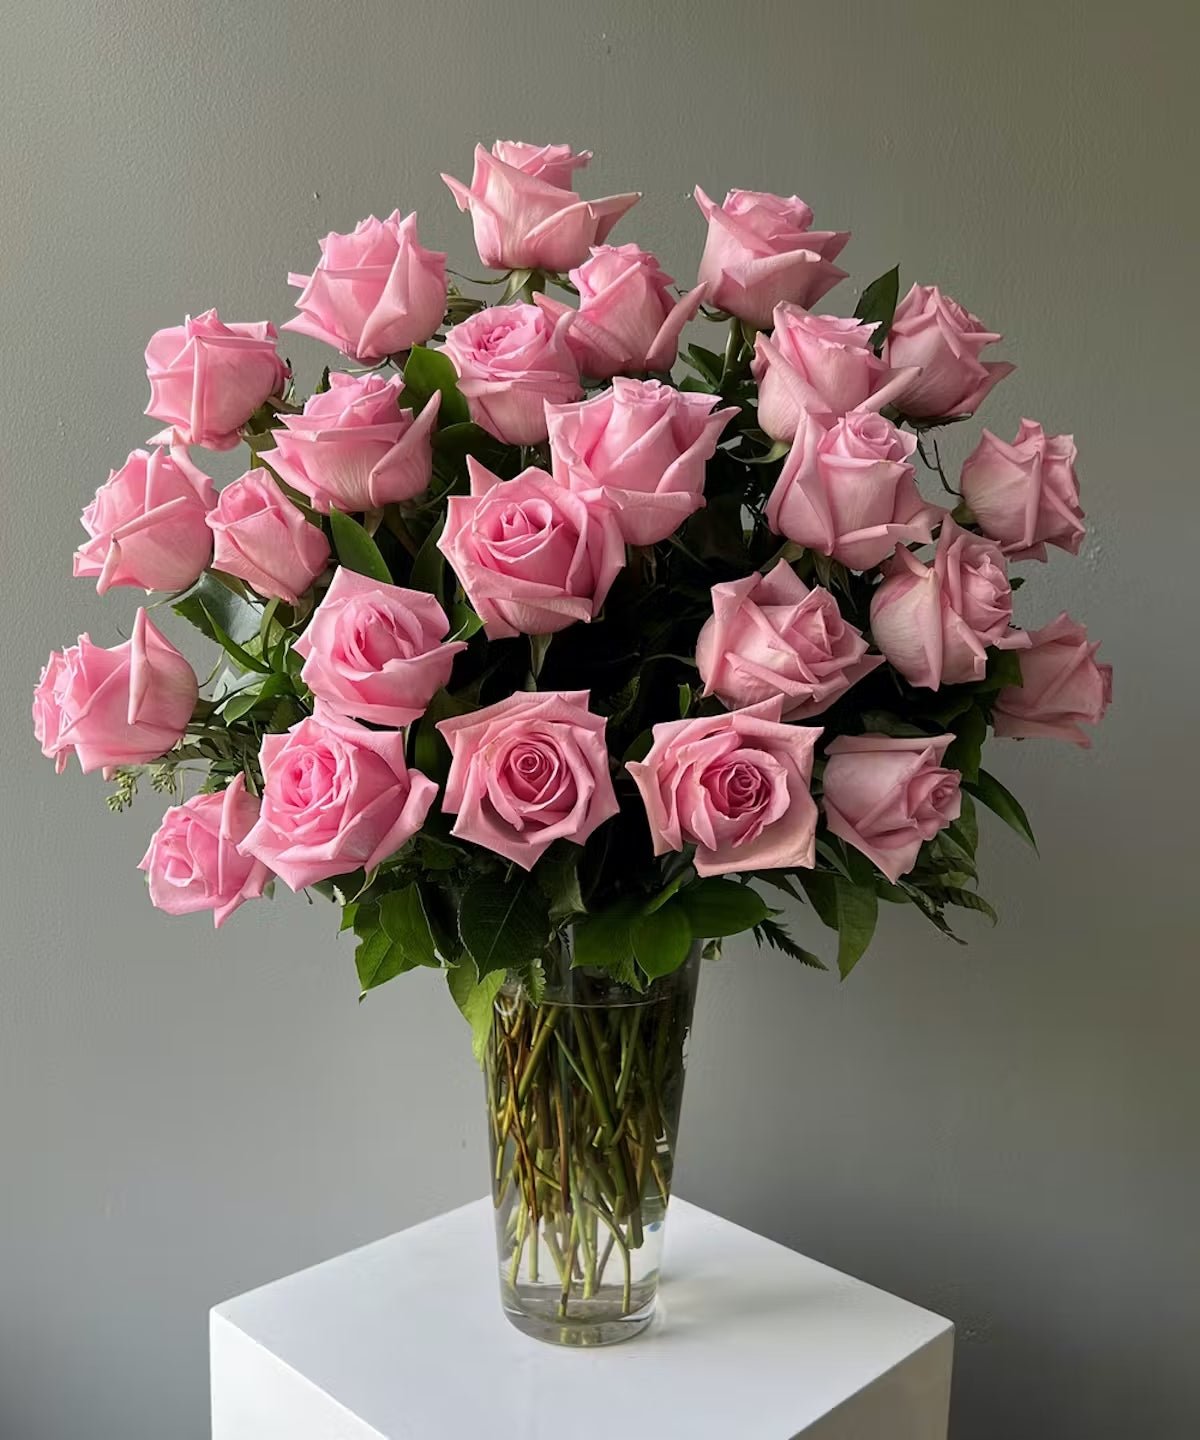 Light Pink Roses in a Vase - Lily's Bloom Boutique